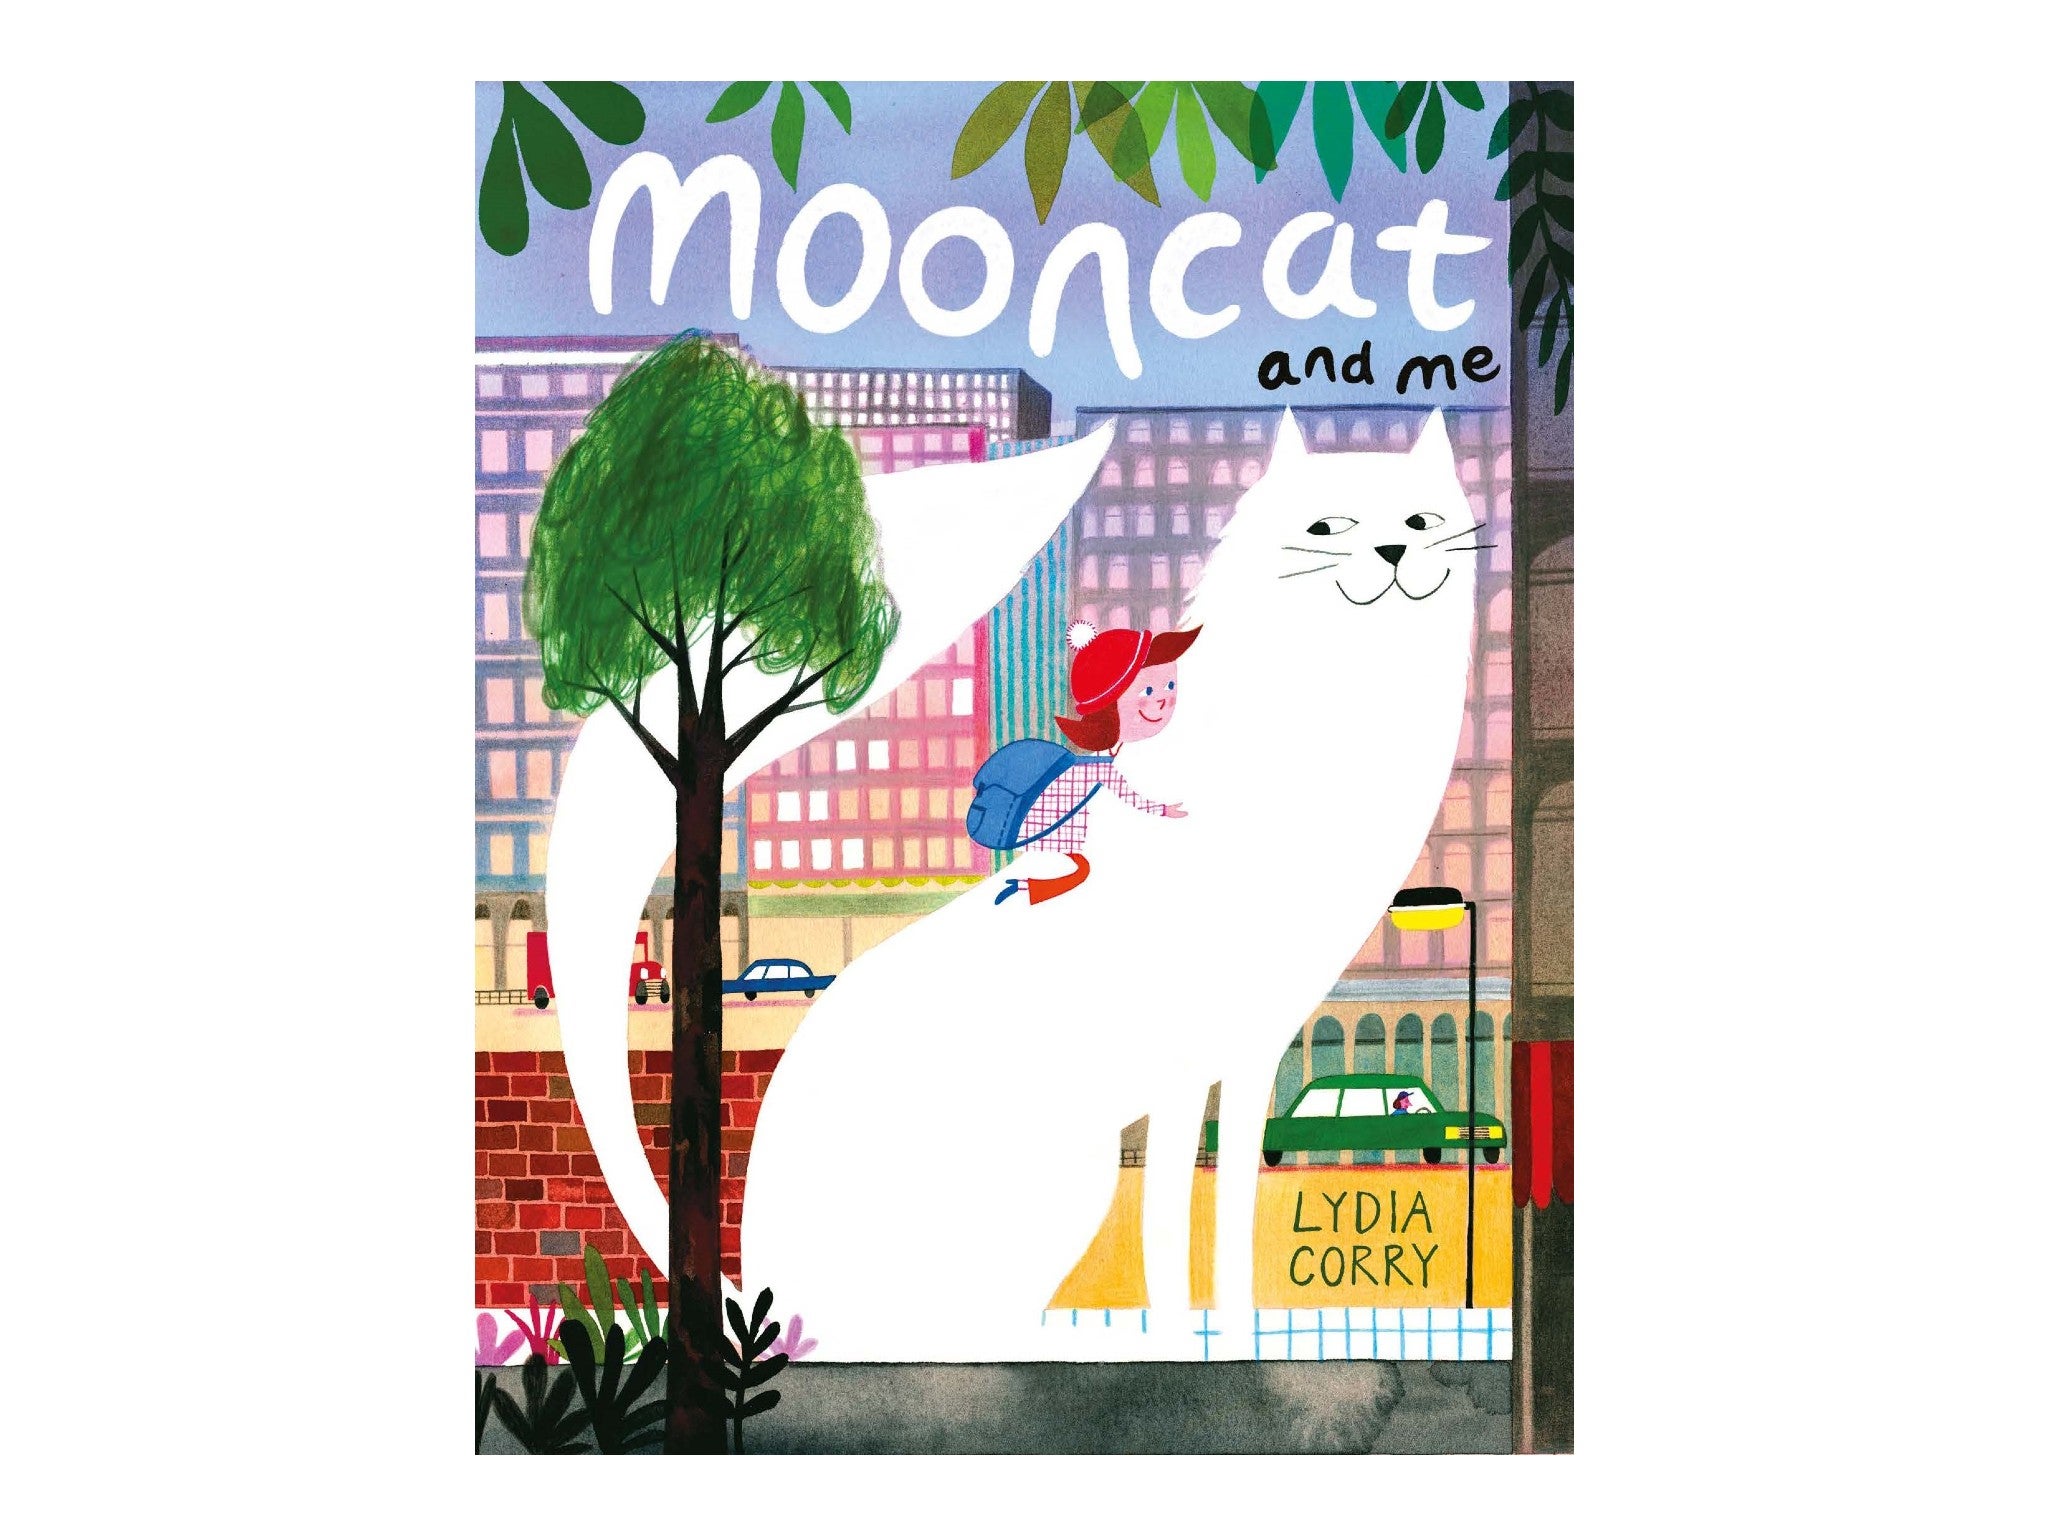 Mooncat and Me by Lydia Corry, published by Two Hoots Best illustrations indybest.jpeg